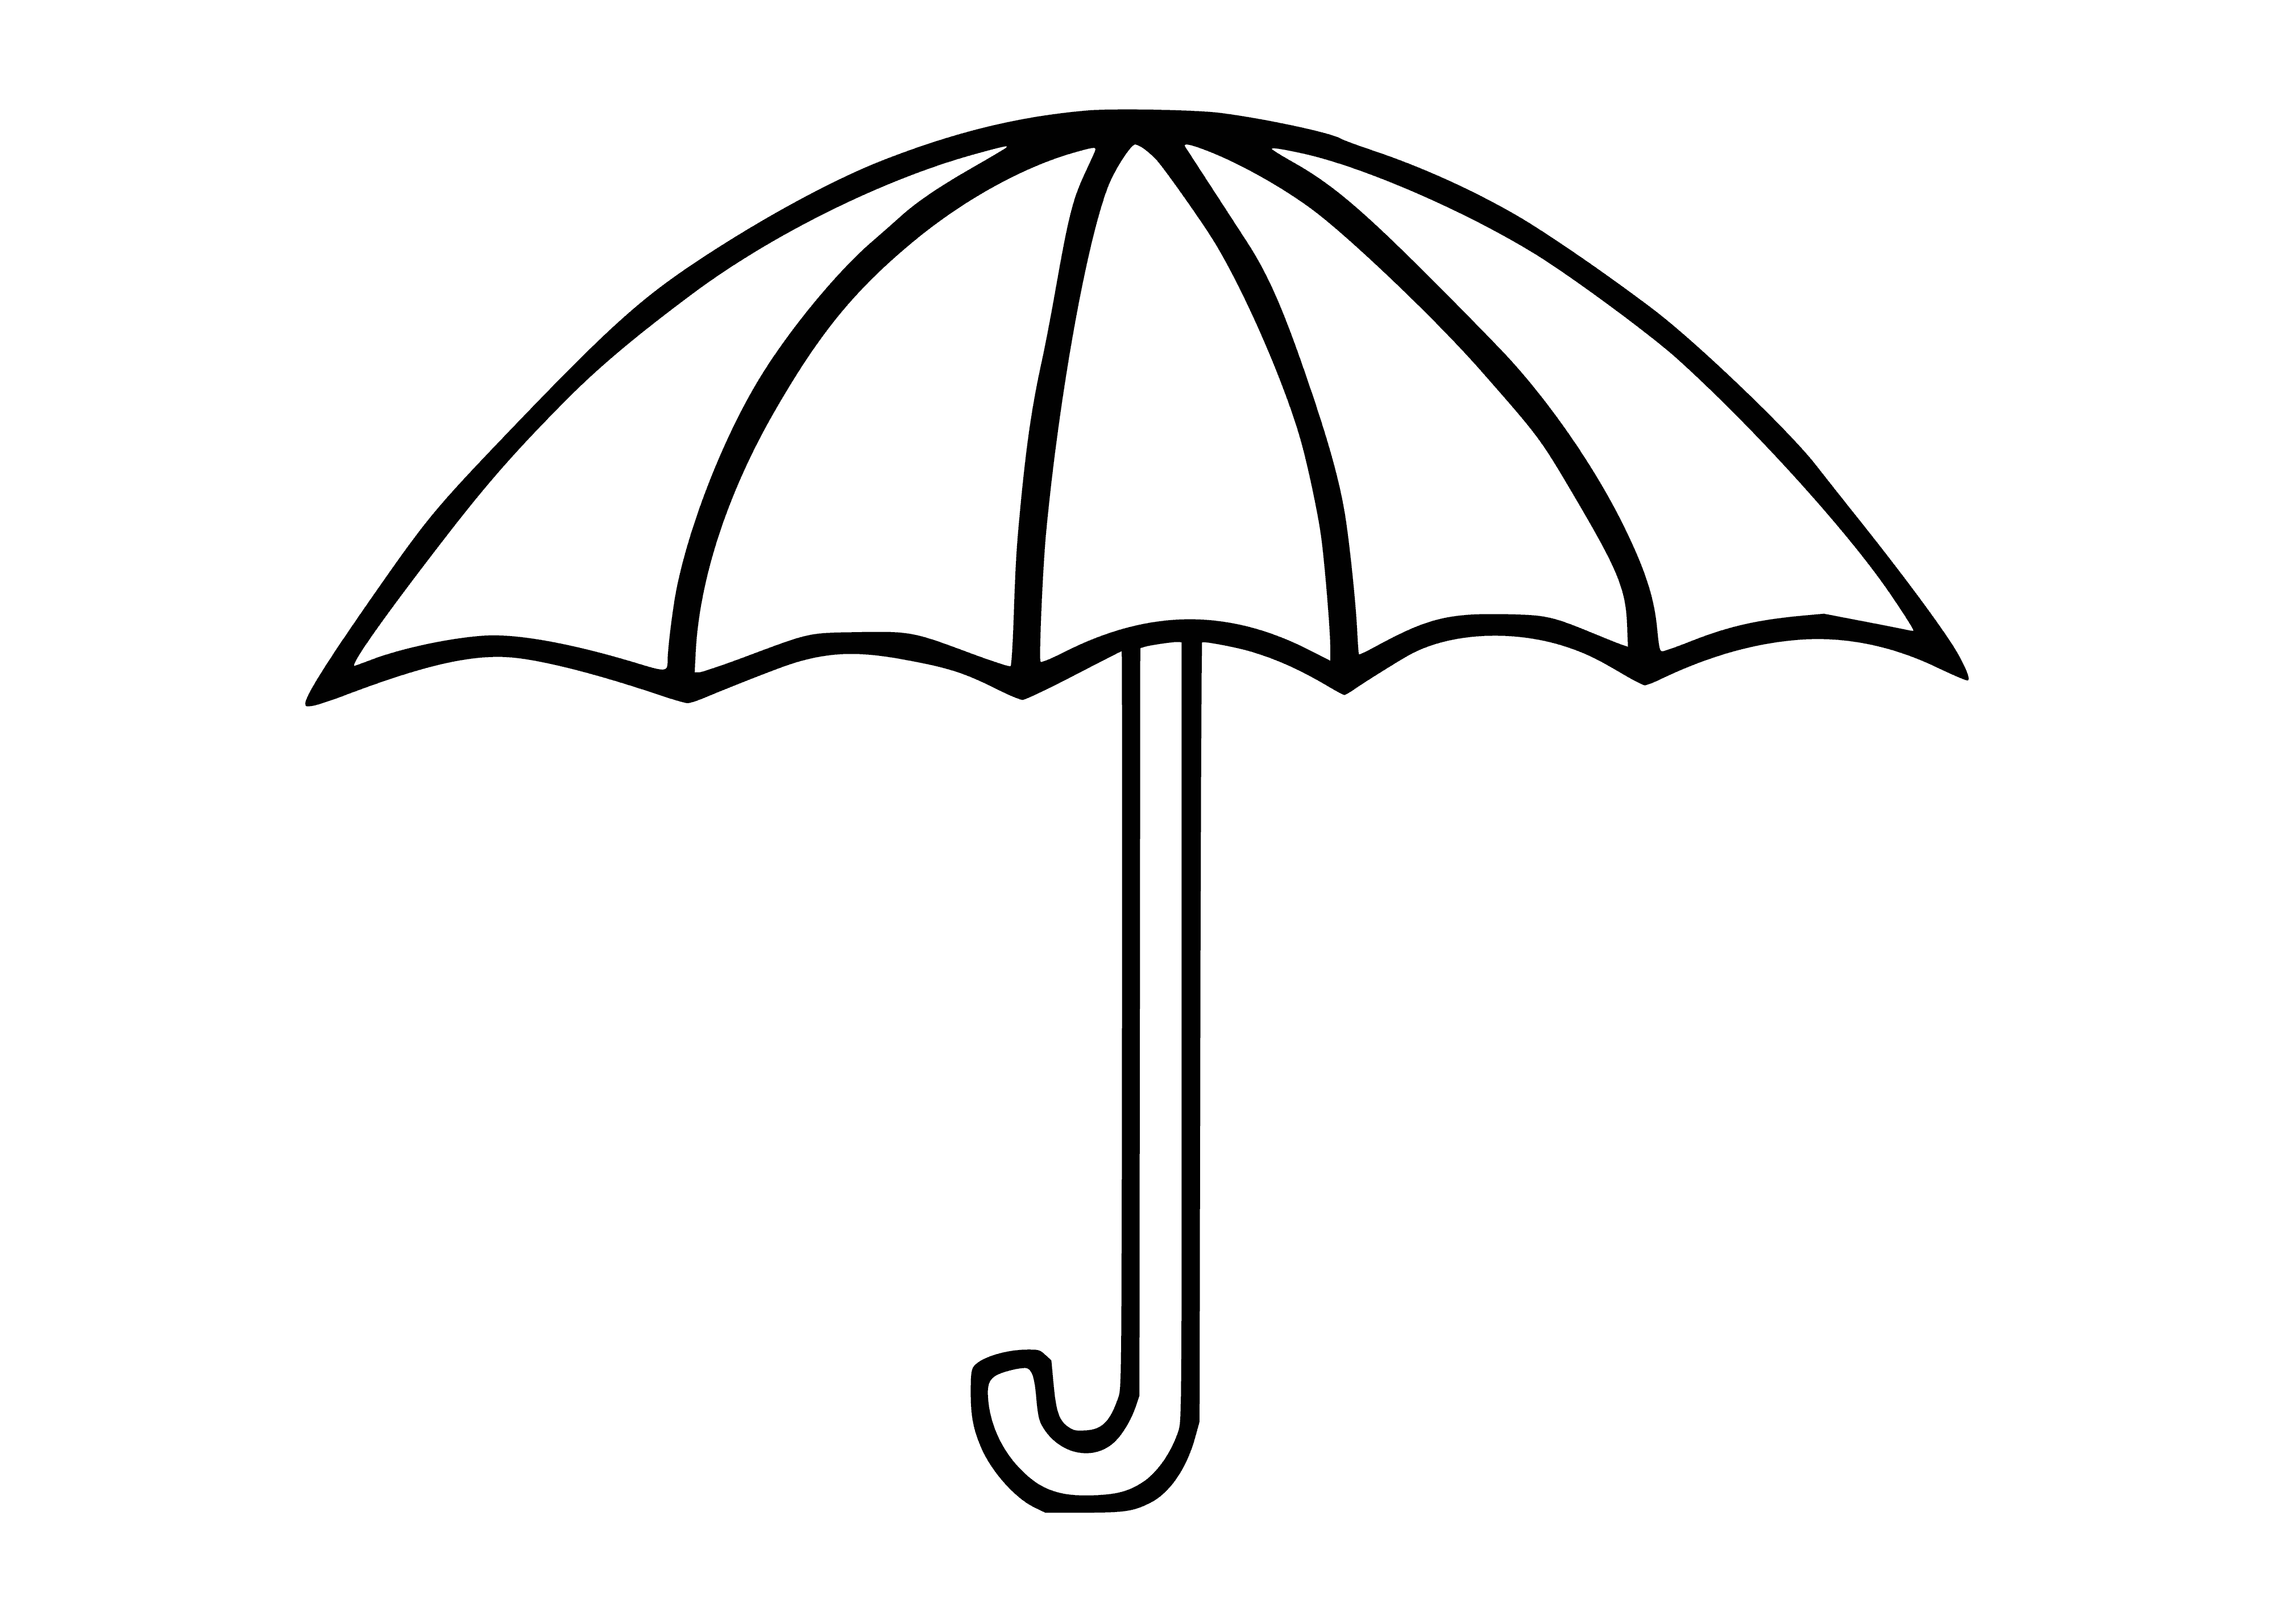 coloring page: Child stands in rain wearing yellow raincoat & boots; holds red/yellow umbrella. #rainyday